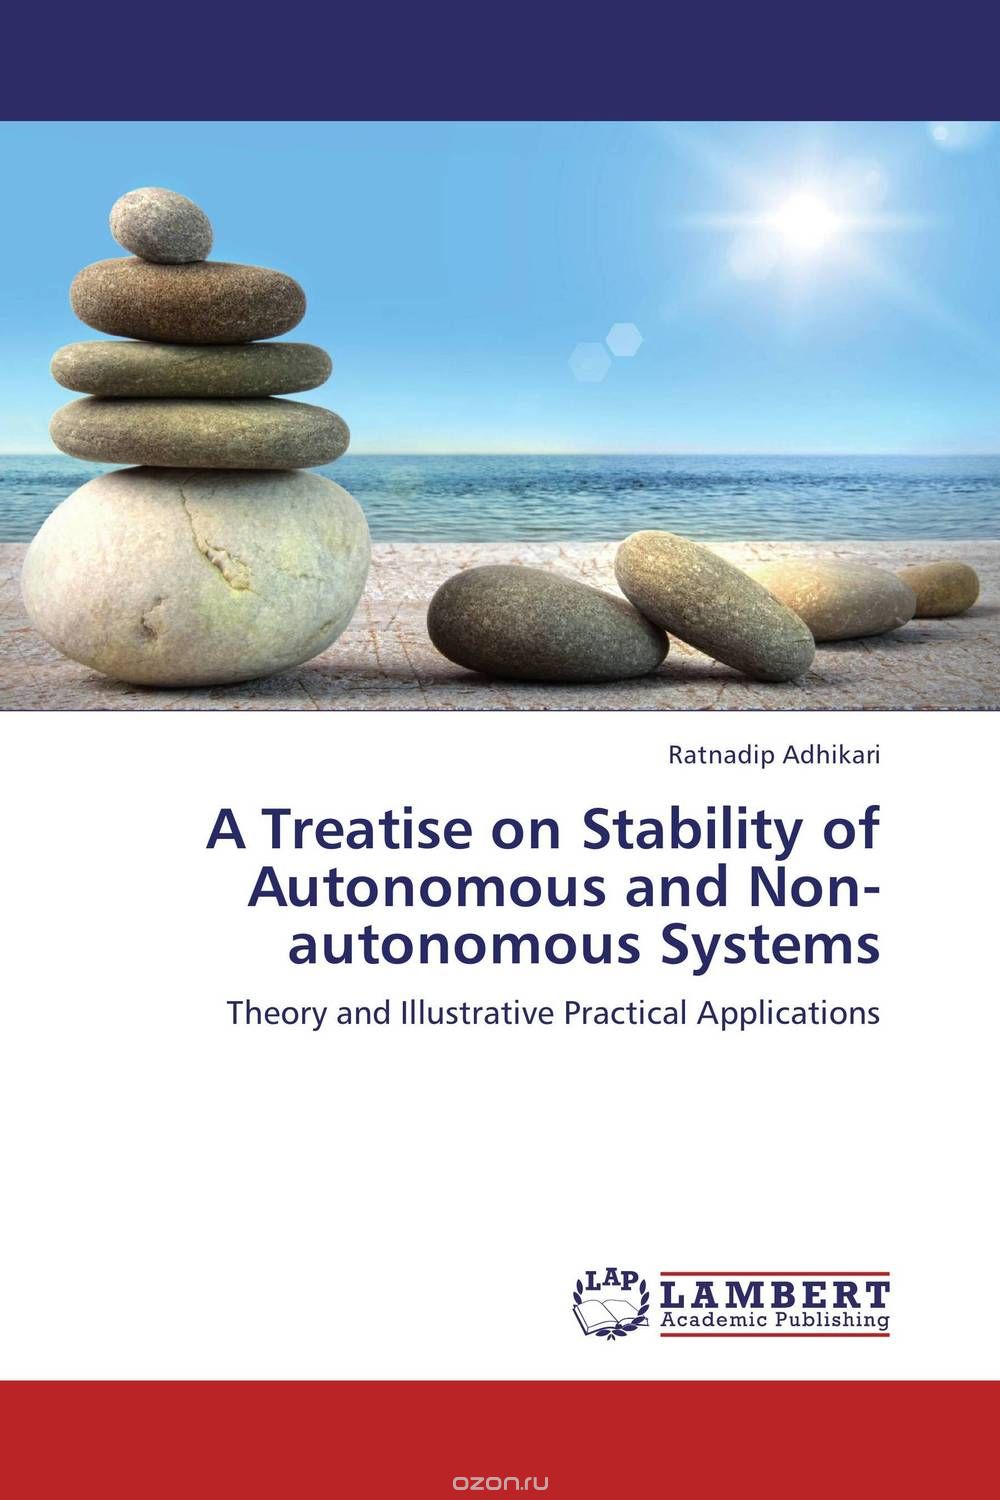 A Treatise on Stability of Autonomous and Non-autonomous Systems